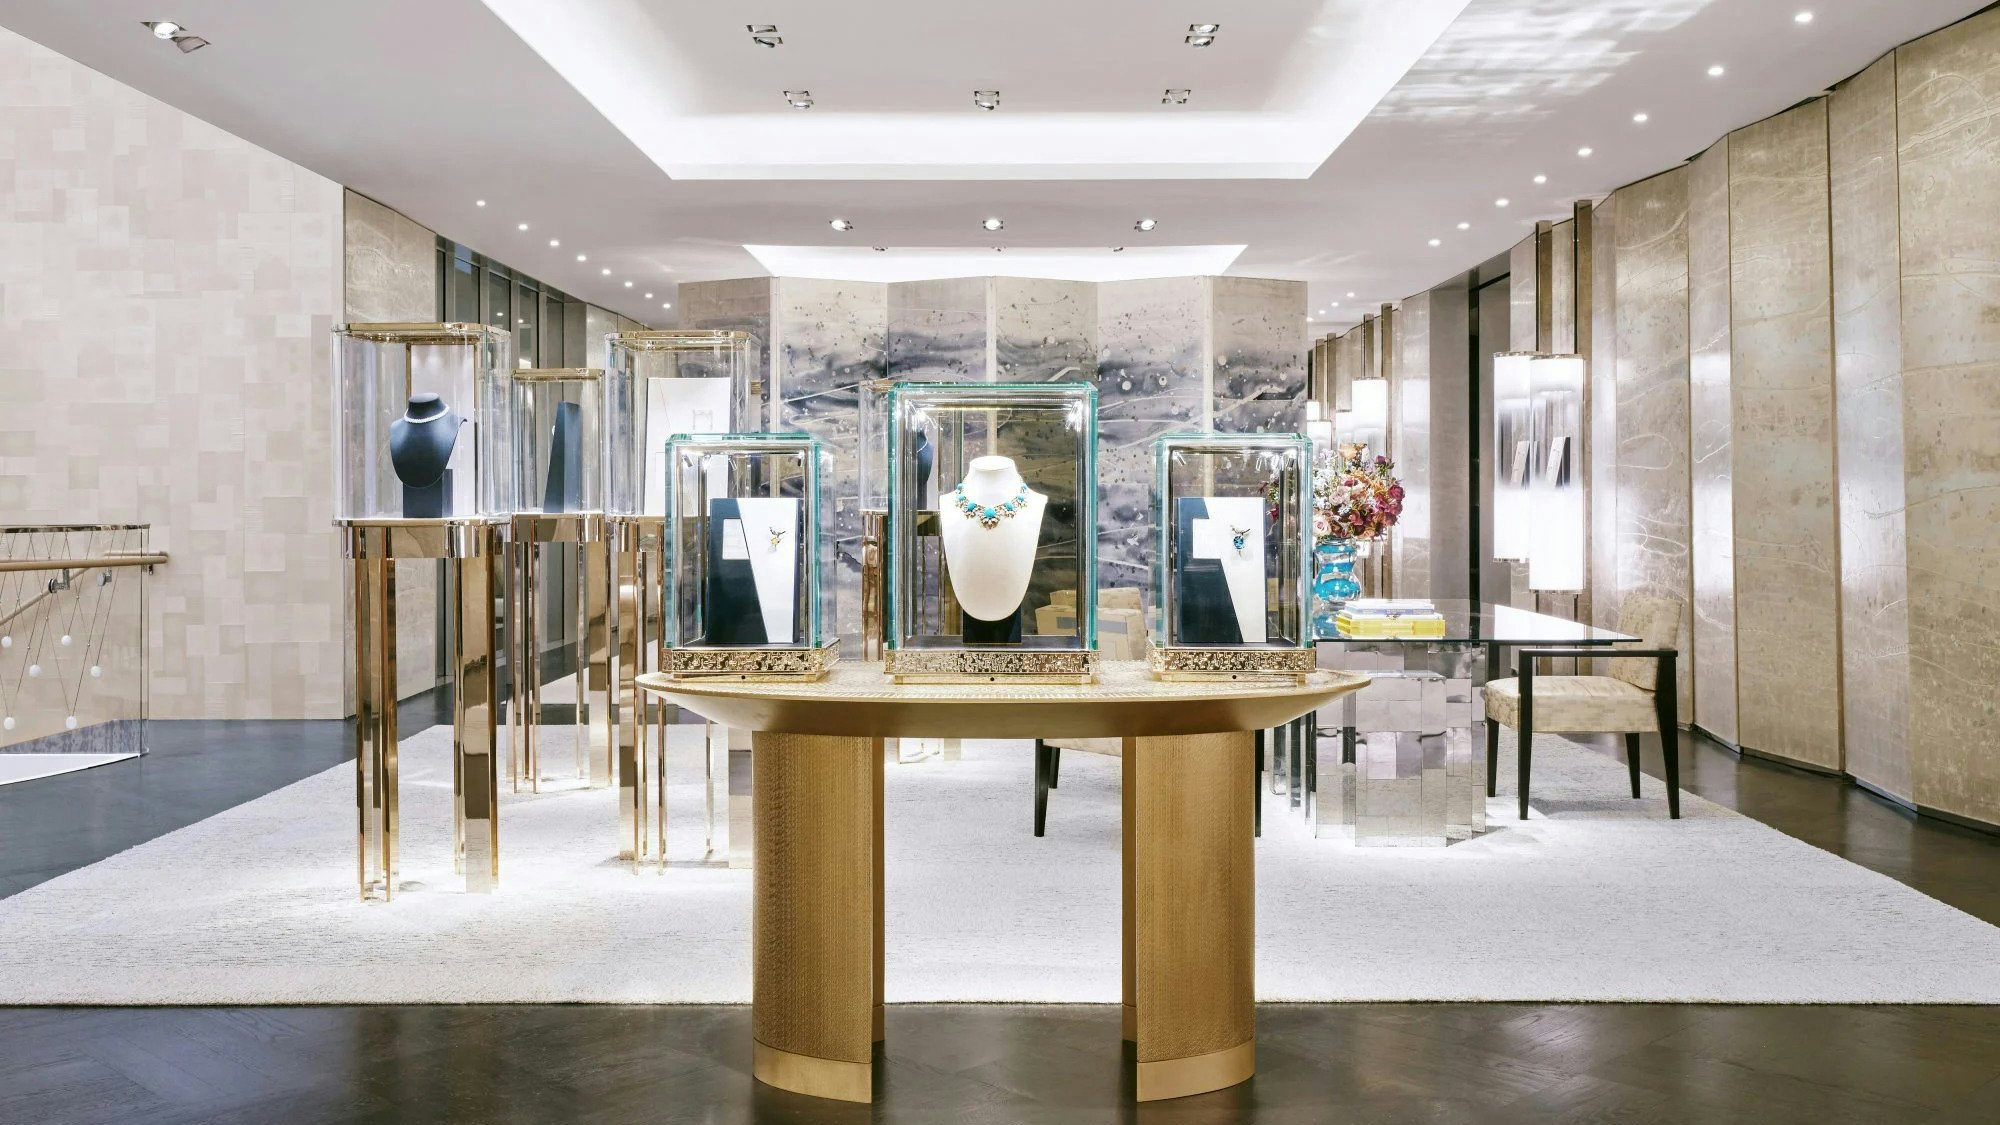 The famed jeweler is turning inward with a revamped New York flagship store, new café and other immersive experiences. Photo: Tiffany & Co.